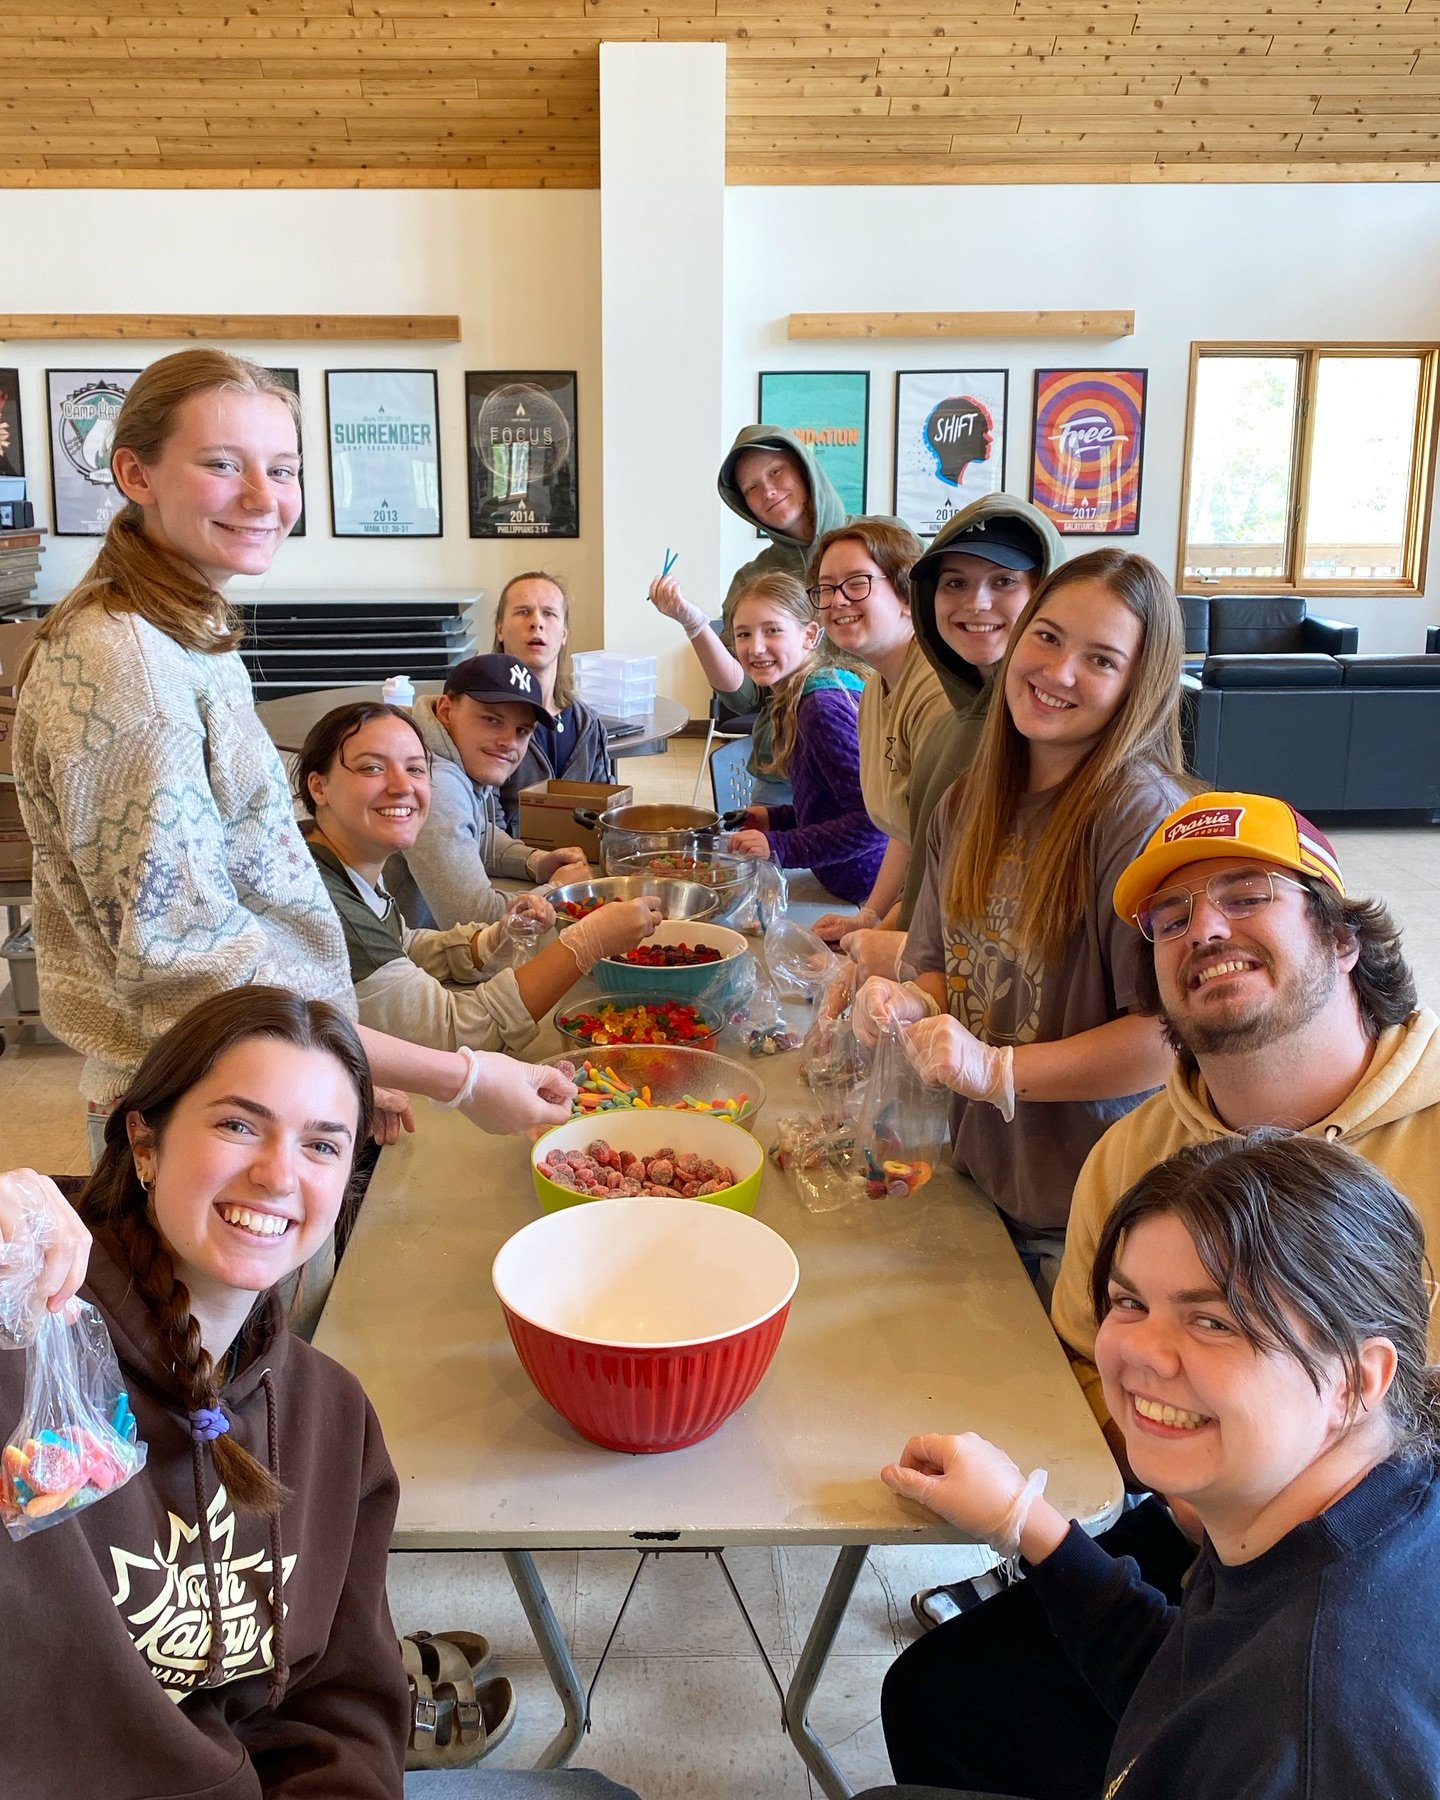 Spring team is working hard to stock up the candy bags FOR YOU!! Come and discover candy bag wonders this summer at Camp Kadesh!! What do you hope to find in your candy bag? 🍭🥳🍬